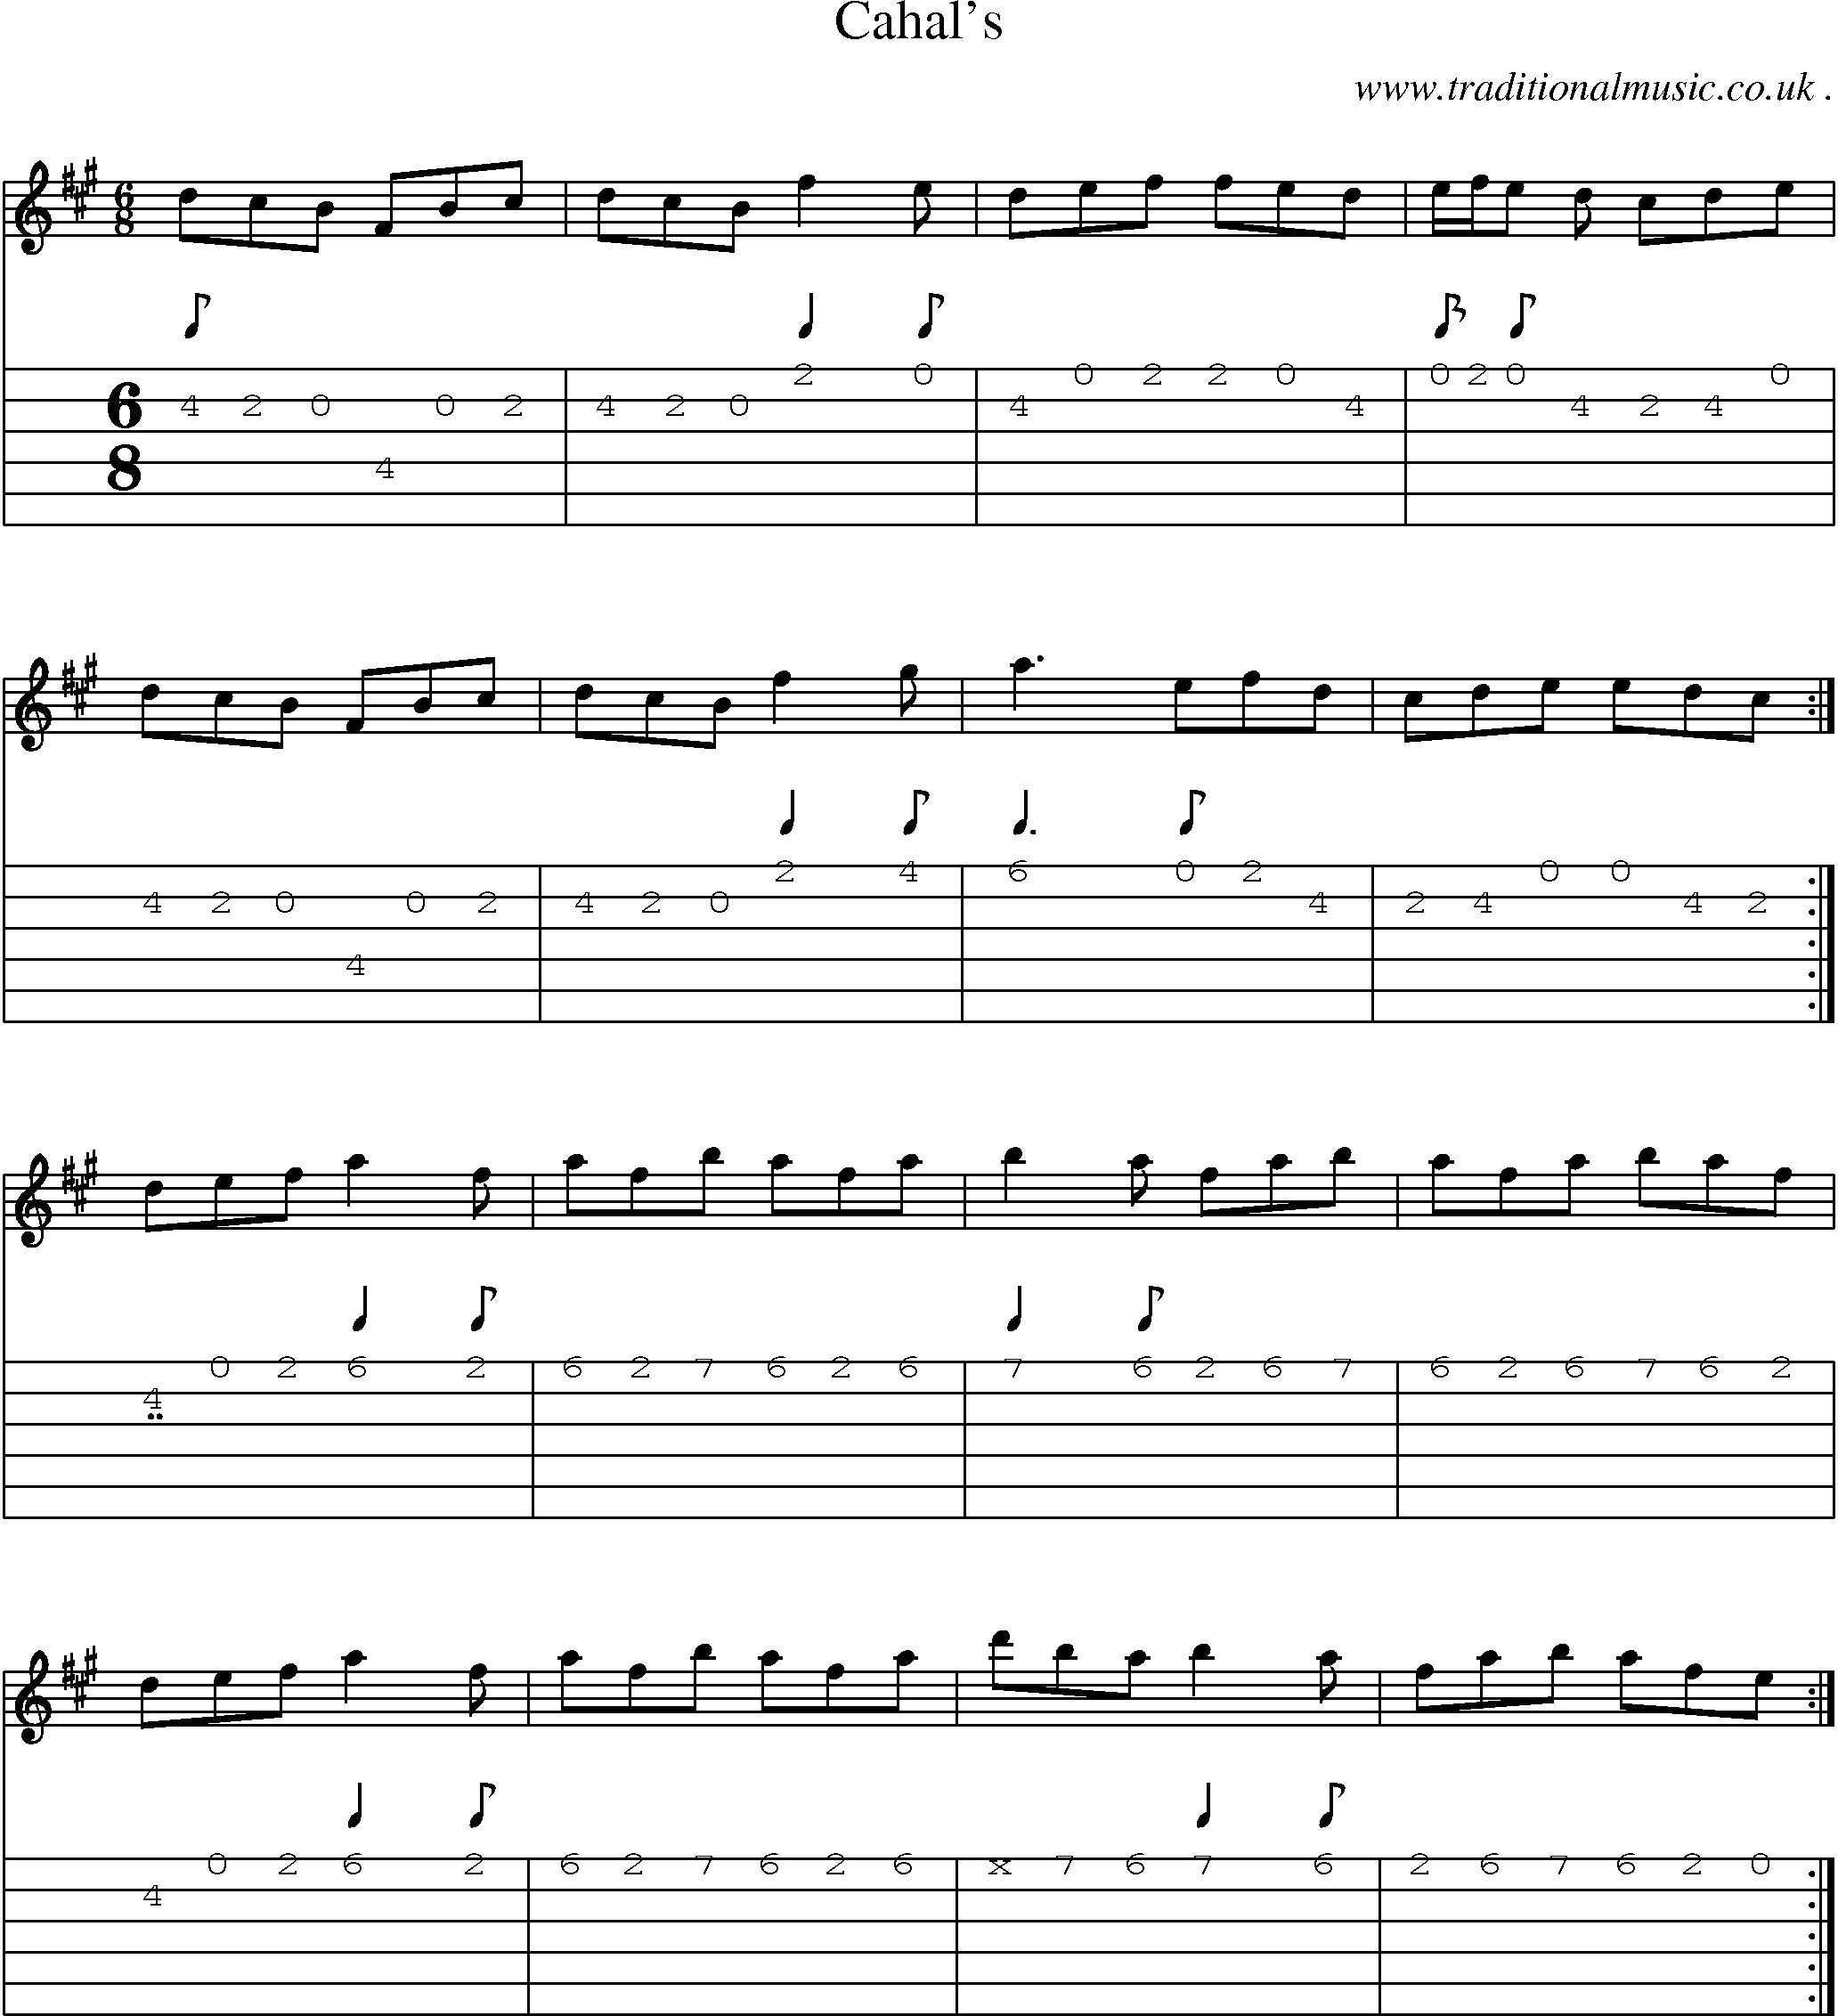 Sheet-Music and Guitar Tabs for Cahals